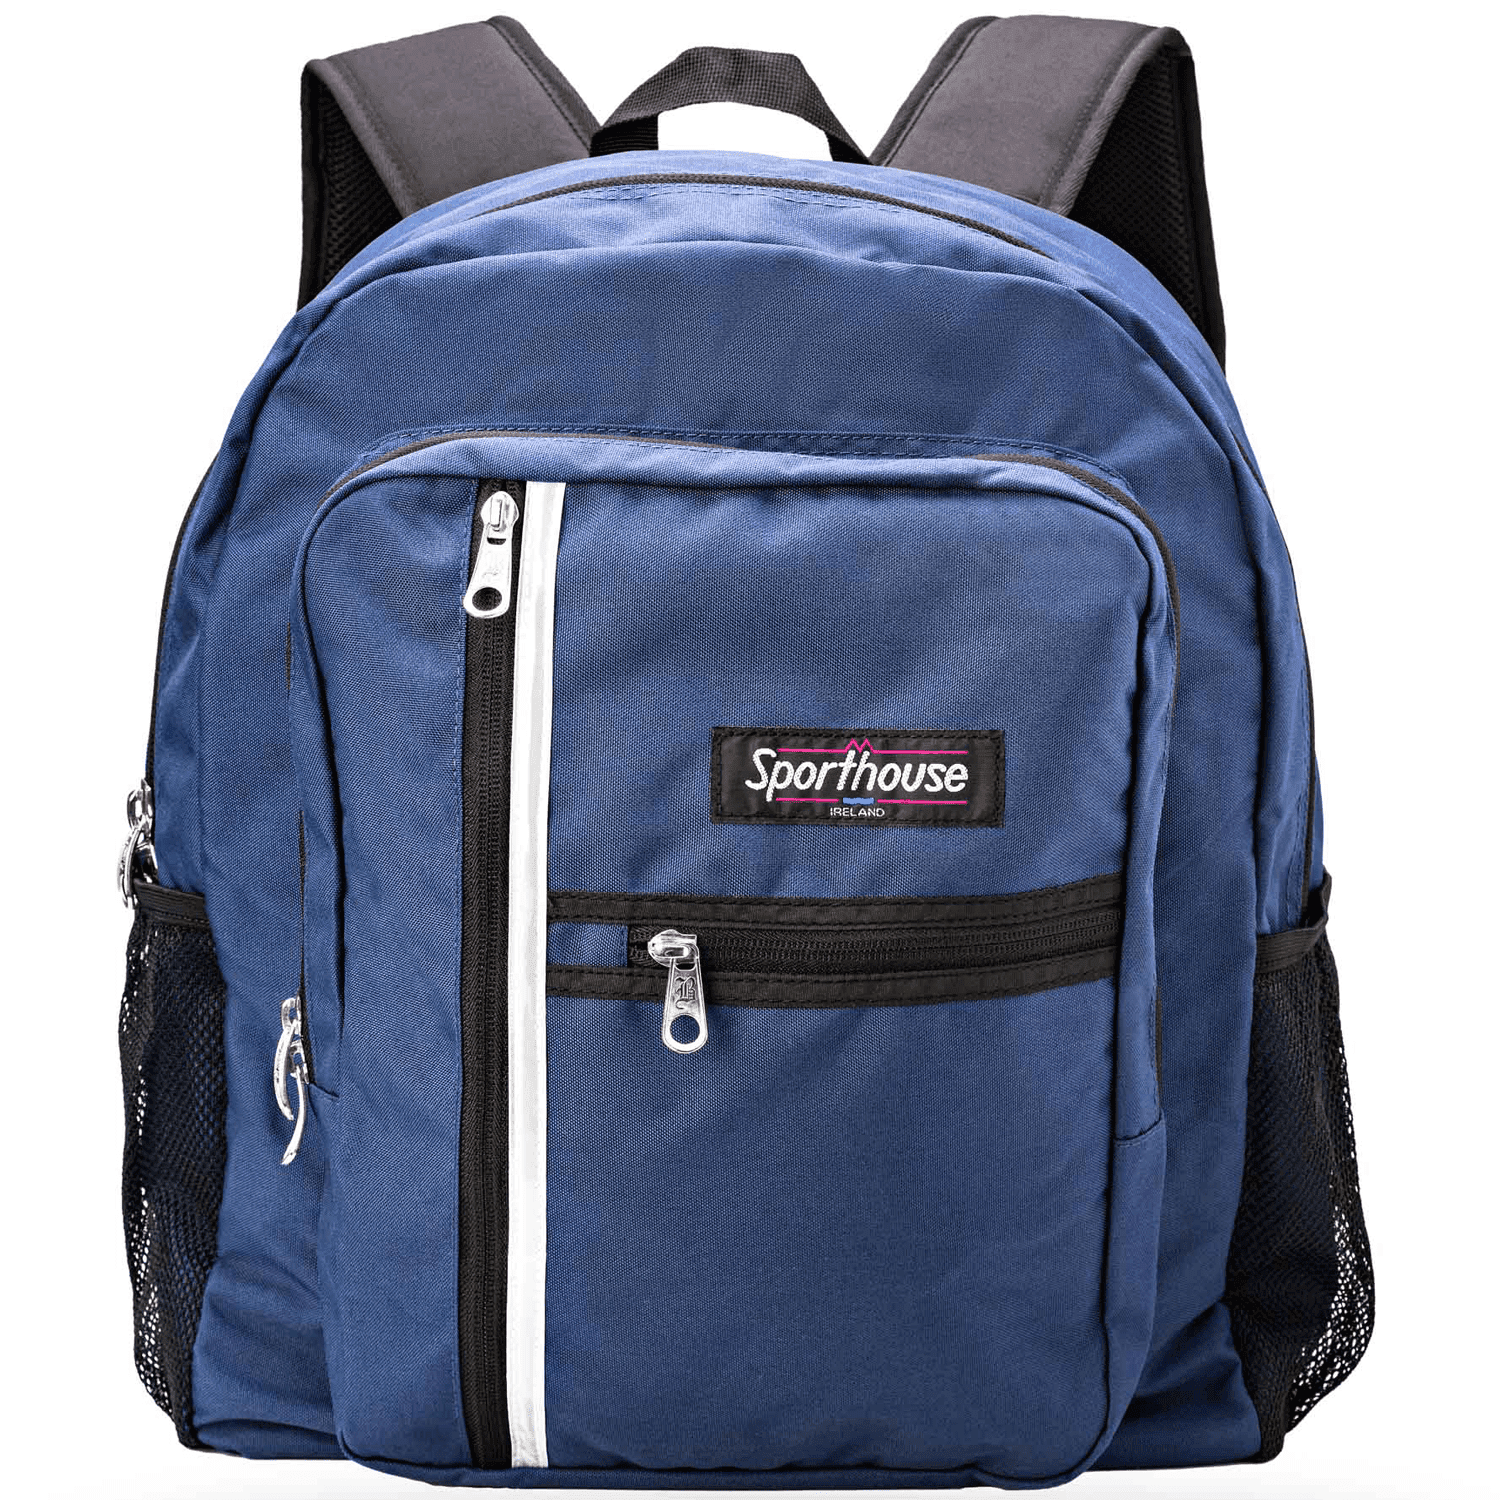 Sporthouse Student 2000 42L Backpack - Navy 1 Shaws Department Stores